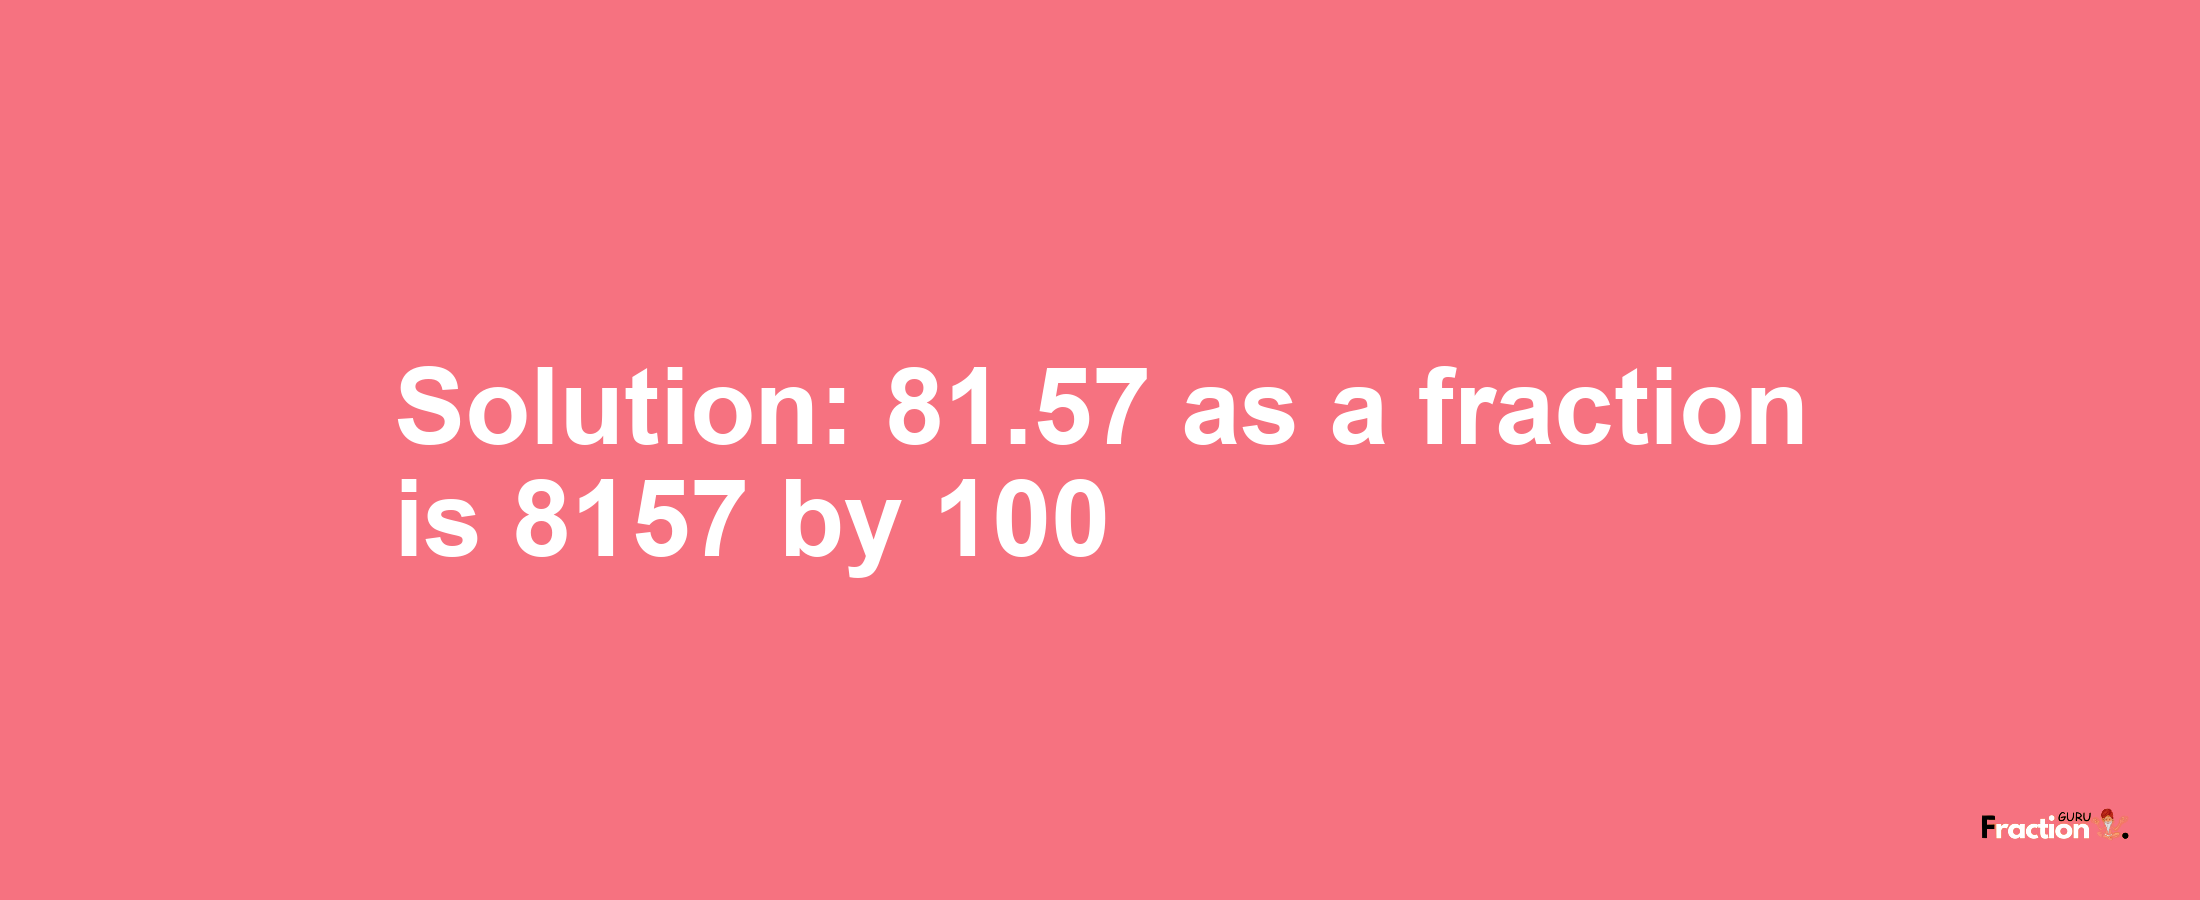 Solution:81.57 as a fraction is 8157/100